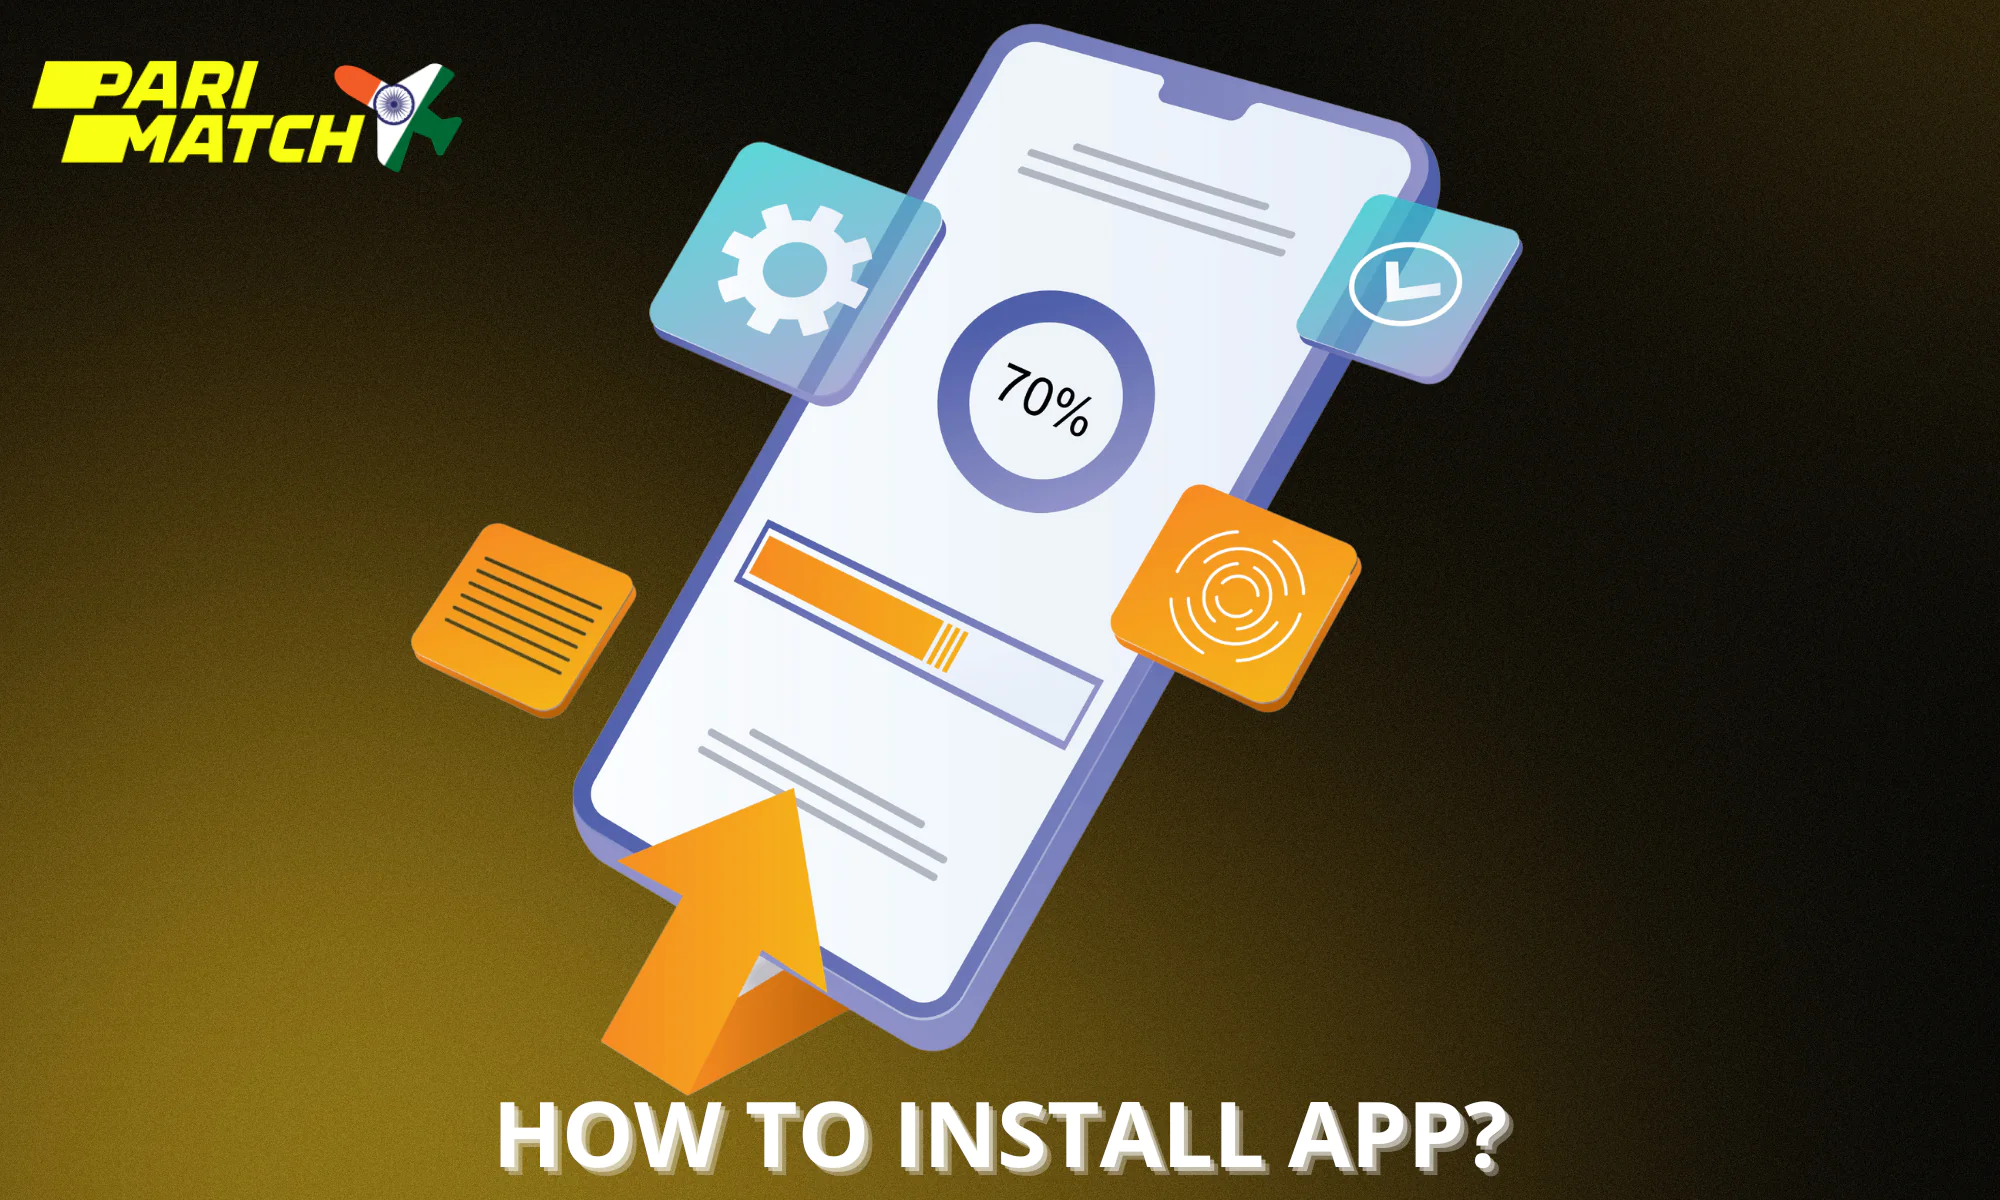 Step-by-step instructions for installing the Parimatch Aviator app for IOS and Android